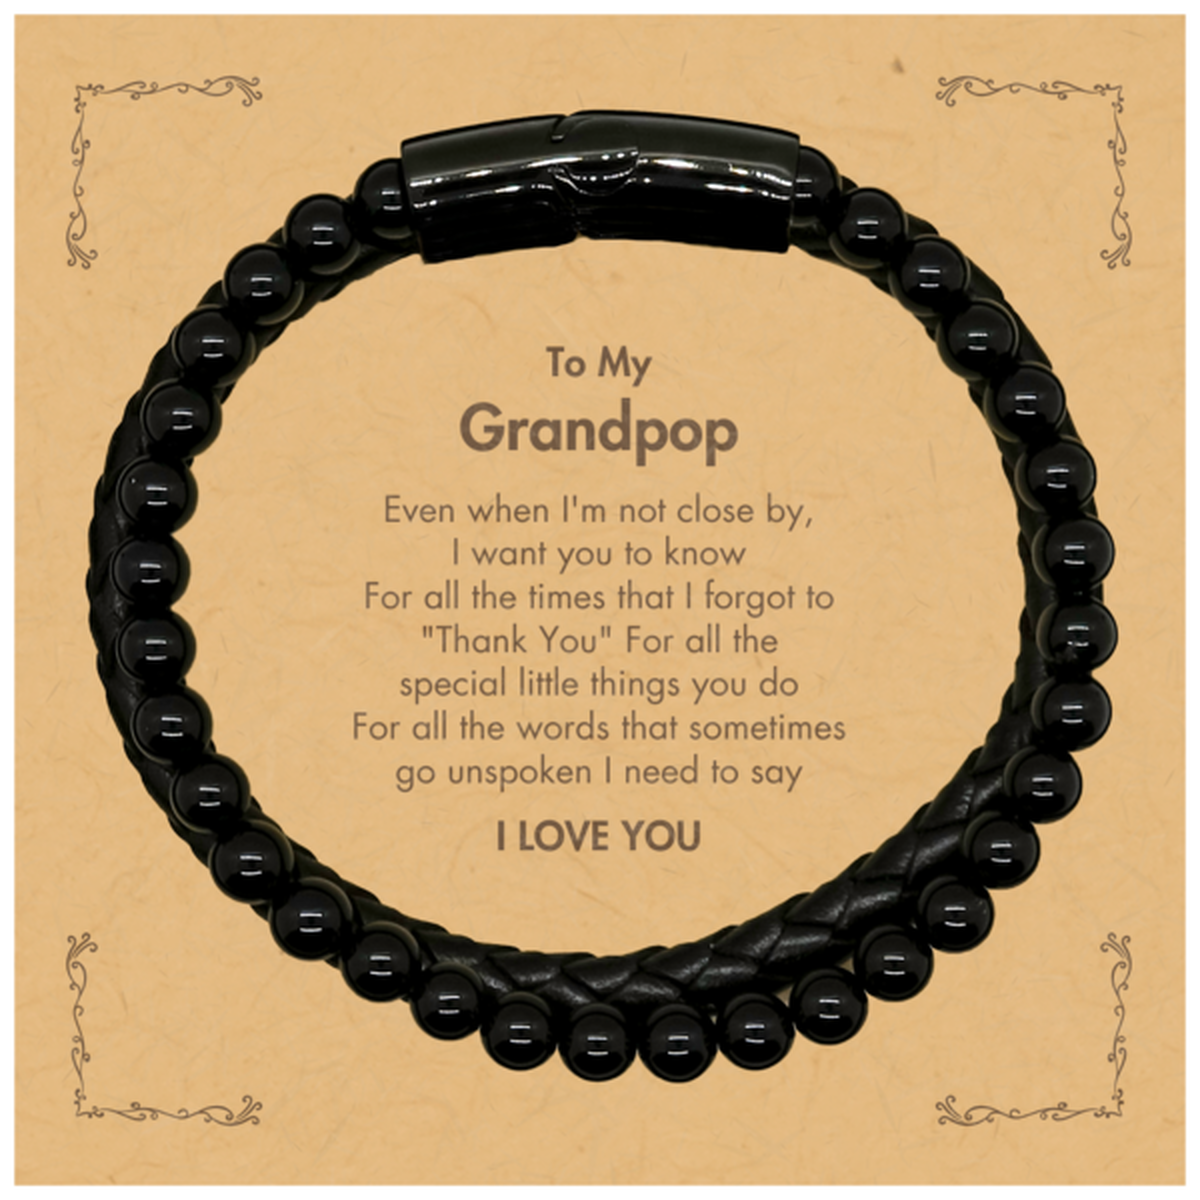 Thank You Gifts for Grandpop, Keepsake Stone Leather Bracelets Gifts for Grandpop Birthday Mother's day Father's Day Grandpop For all the words That sometimes go unspoken I need to say I LOVE YOU